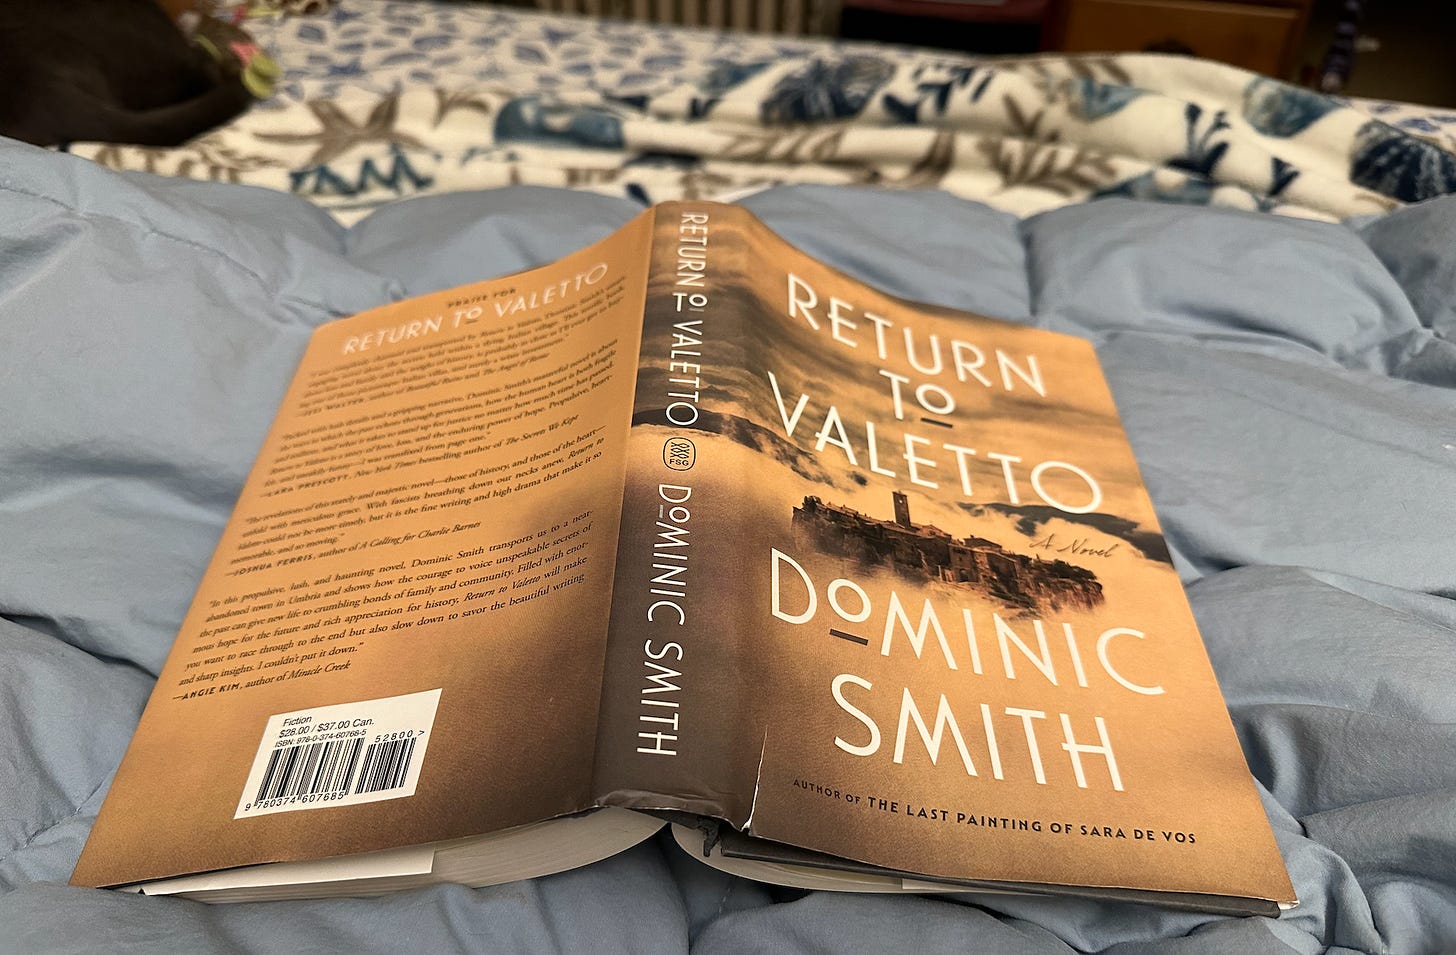 The cover of Dominic Smith's latest novel Return to Valetto